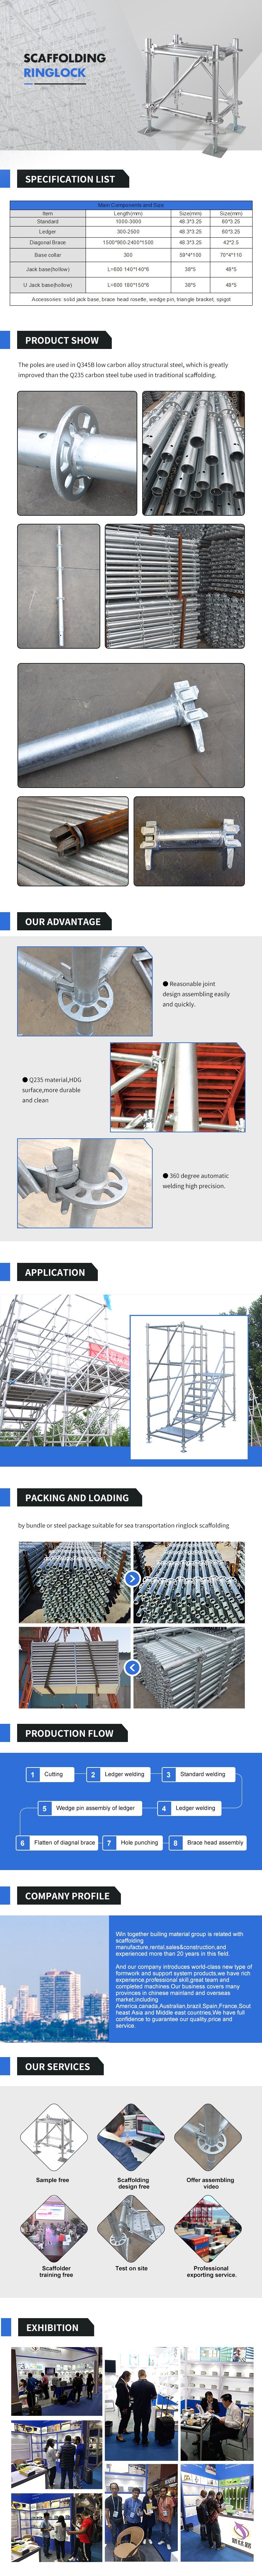 Mobile Kwikstage Scaffolding at Outdoors for Sale